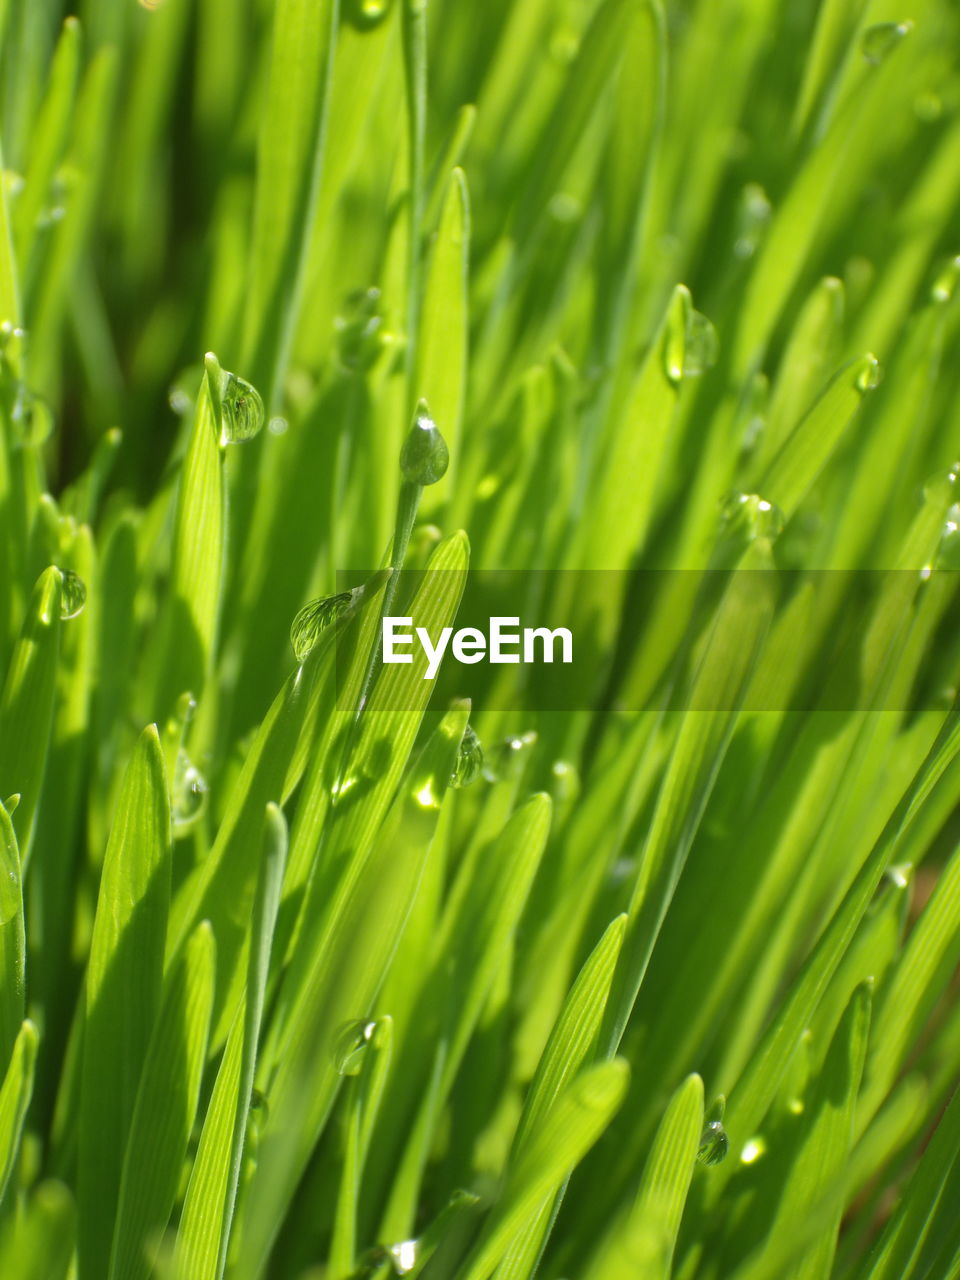 green, plant, growth, grass, nature, lawn, beauty in nature, backgrounds, grassland, no people, field, meadow, land, close-up, leaf, plant part, freshness, full frame, wheatgrass, environment, wet, water, plant stem, drop, agriculture, outdoors, lush foliage, foliage, flower, blade of grass, dew, moisture, selective focus, macro photography, day, sunlight, vibrant color, crop, summer, landscape, hierochloe